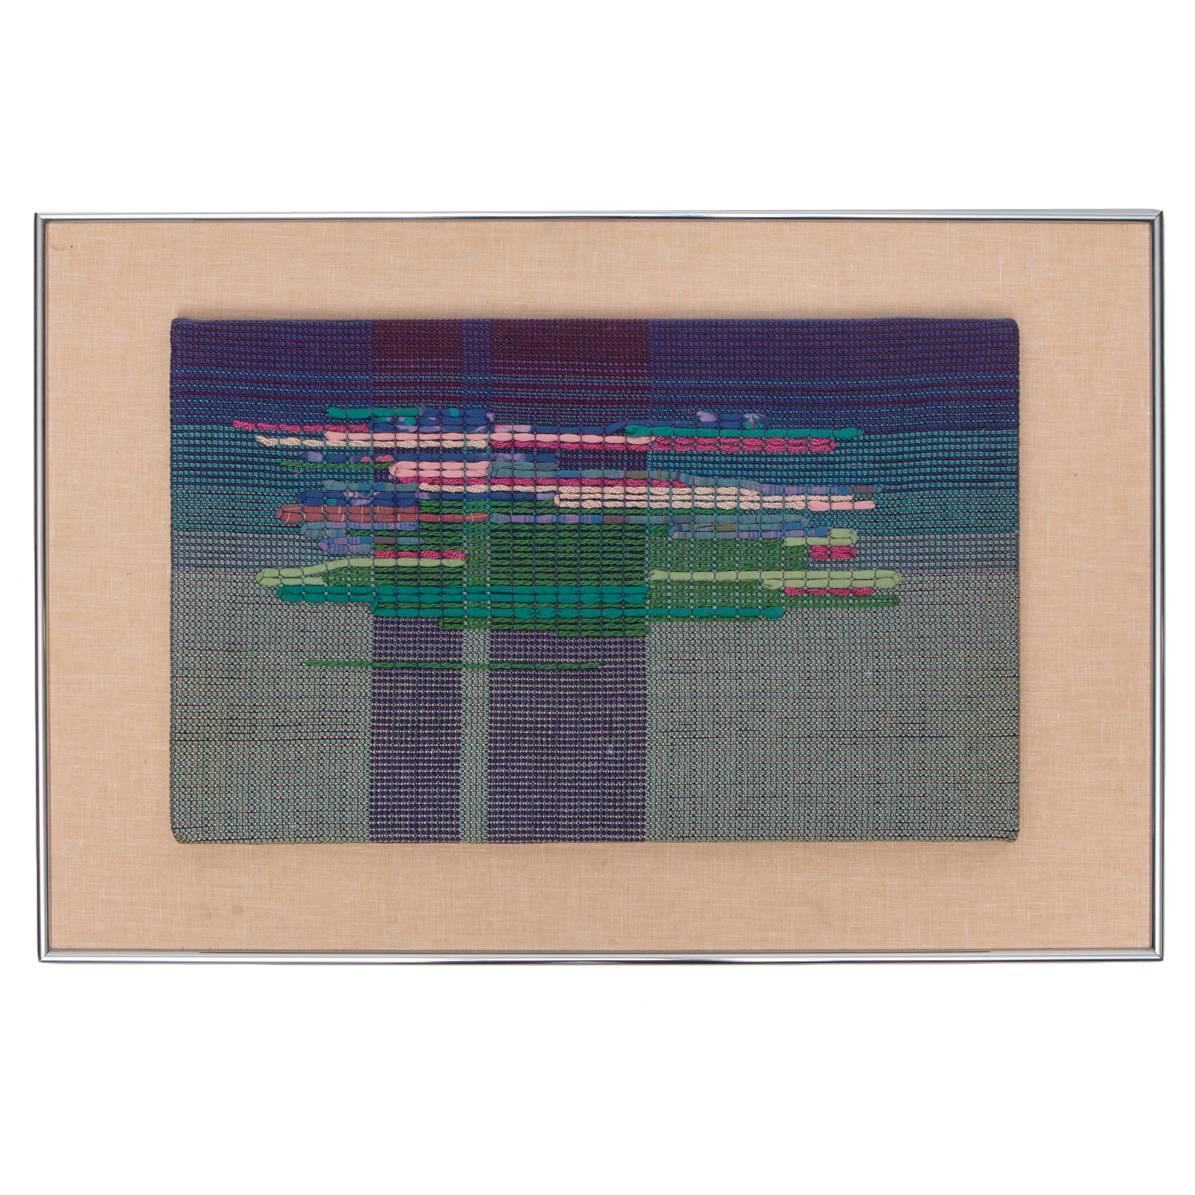 1970s Weaving by Nancy Lyon Called “Monet’s Pond” For Sale